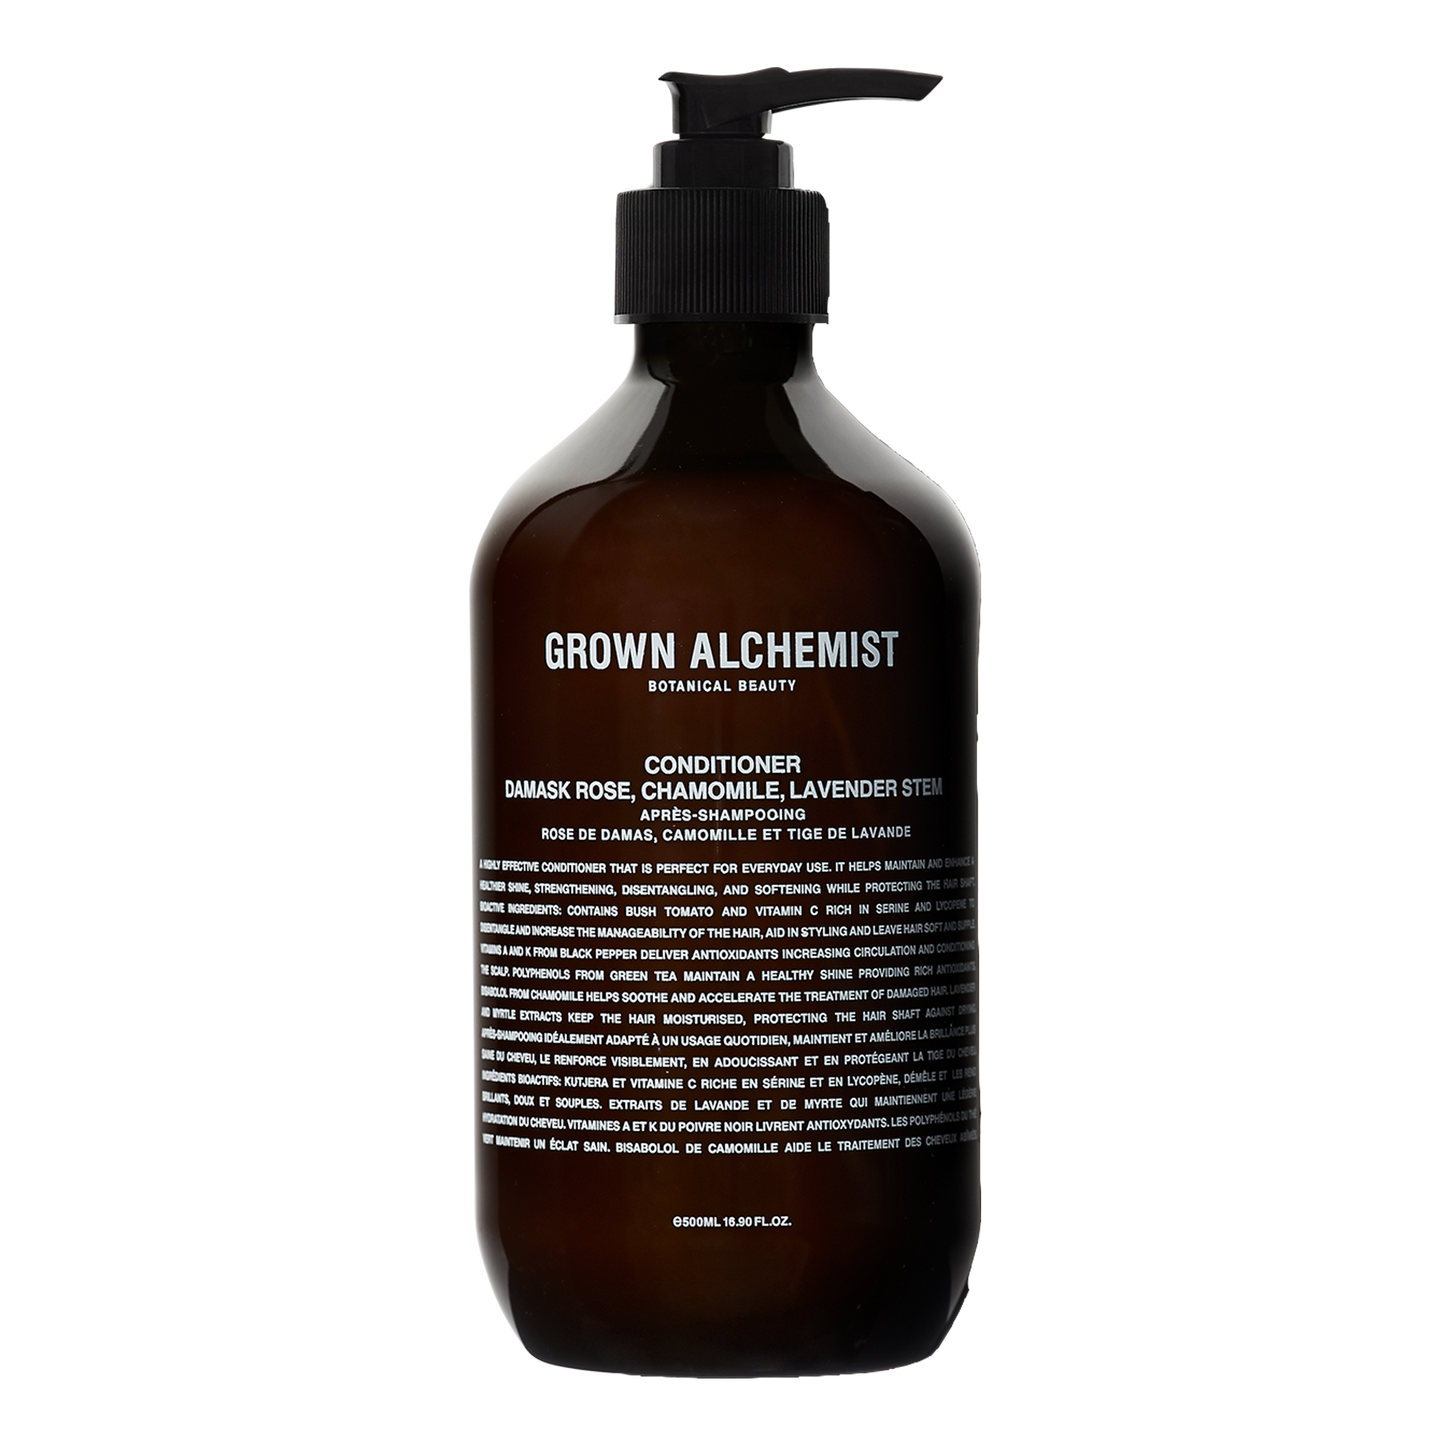 Grown Alchemist Conditioner: A highly effective conditioner that is perfect for everyday use. It helps maintain and enhance a healthier shine, strengthening, disentangling, and softening while protecting the hair shaft.